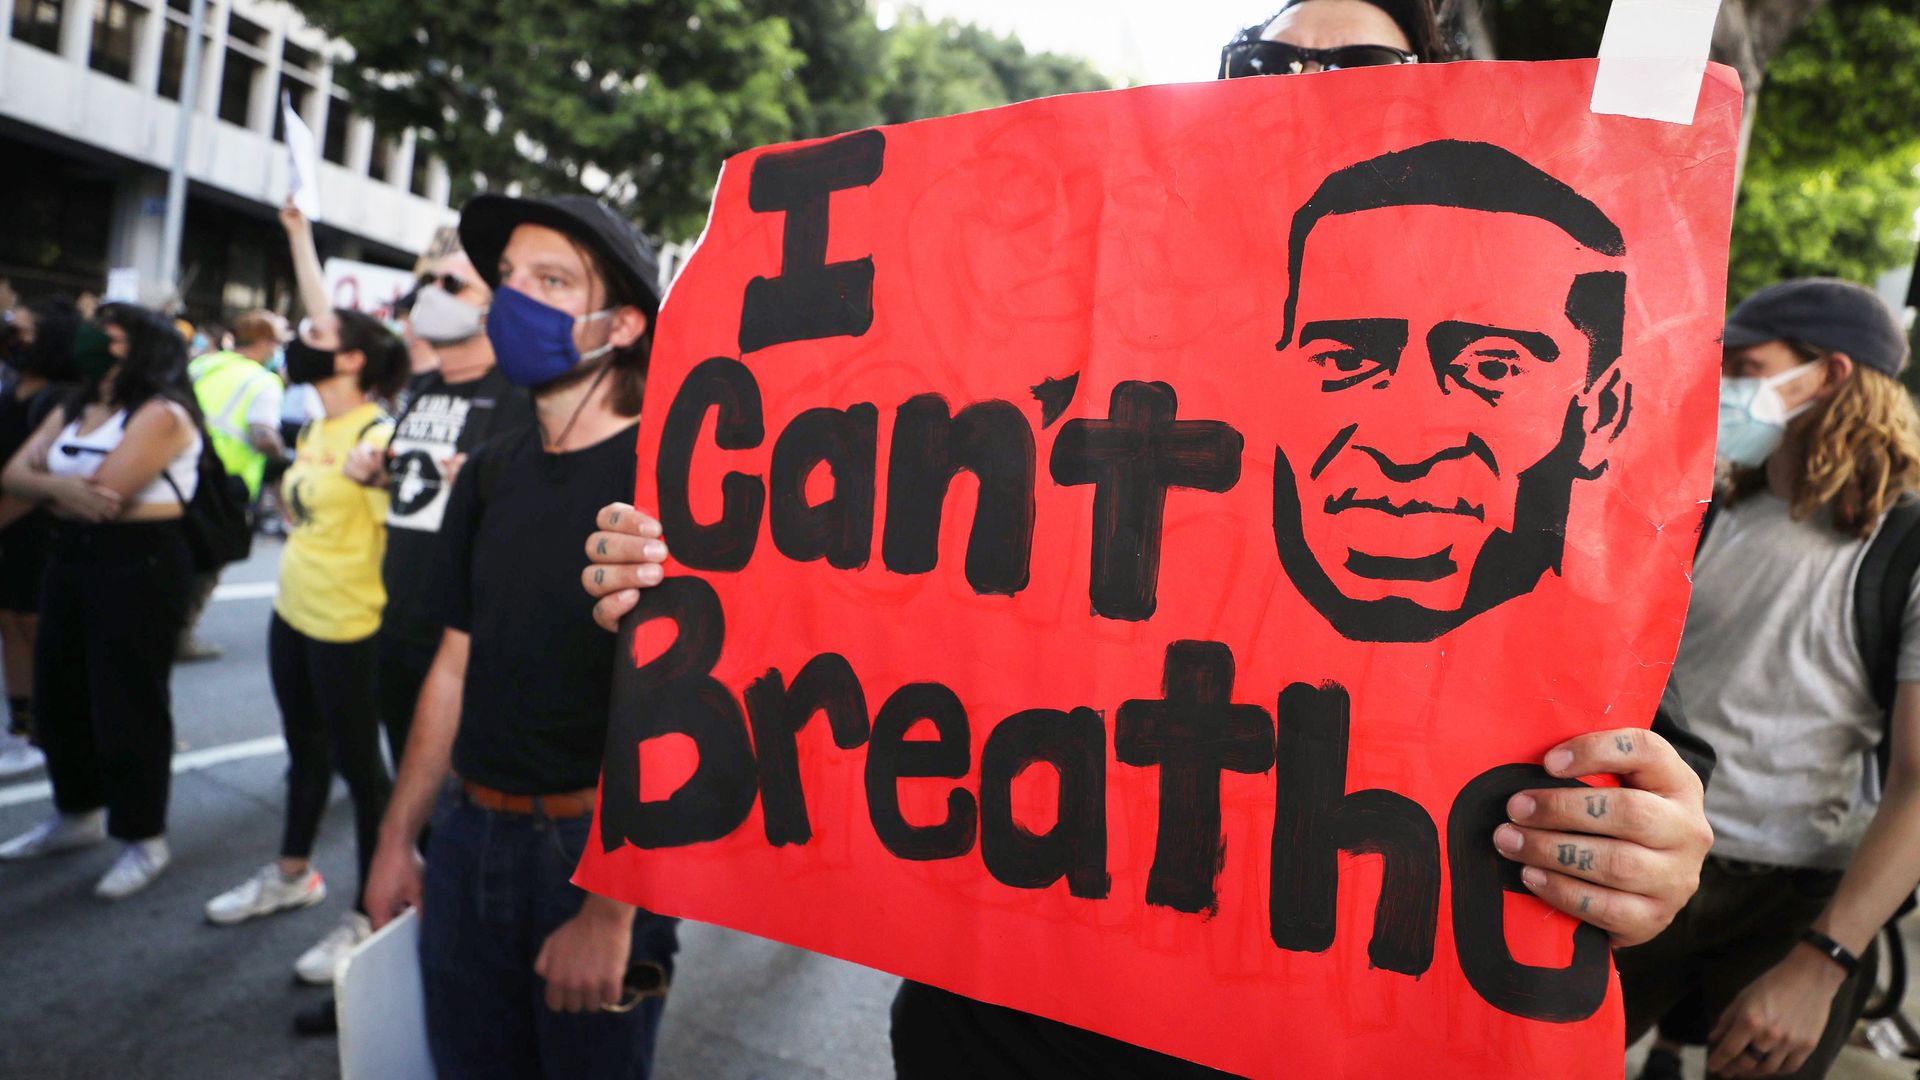 Photo of a person holding a sign that shows a depiction of George Floyd's face and the words "I can't breathe"